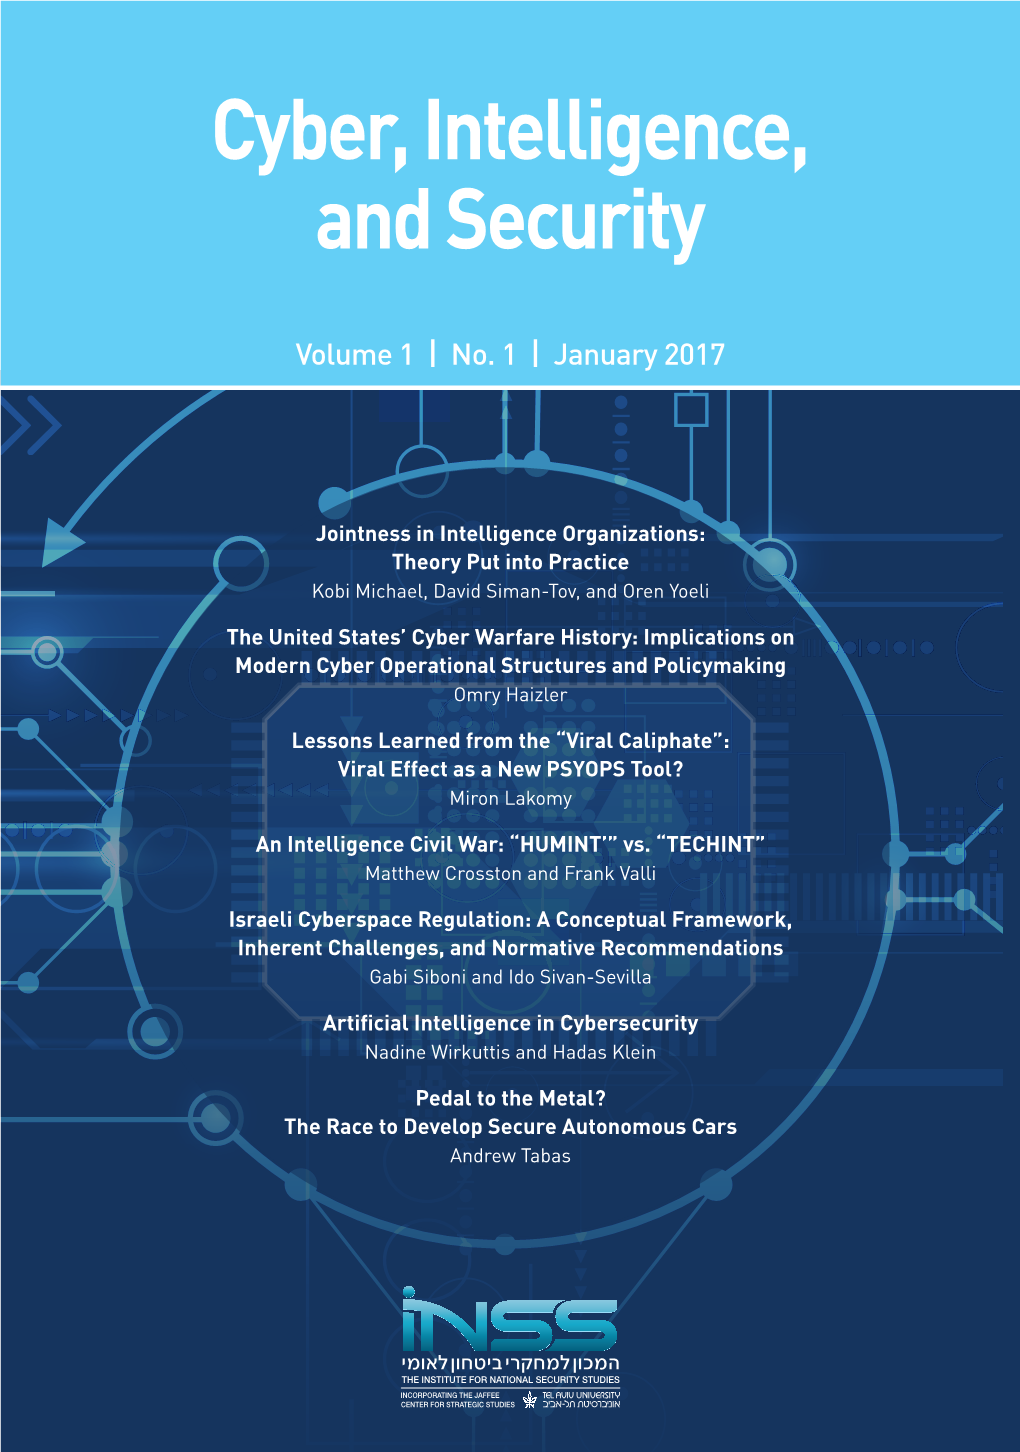 Cyber, Intelligence, and Security